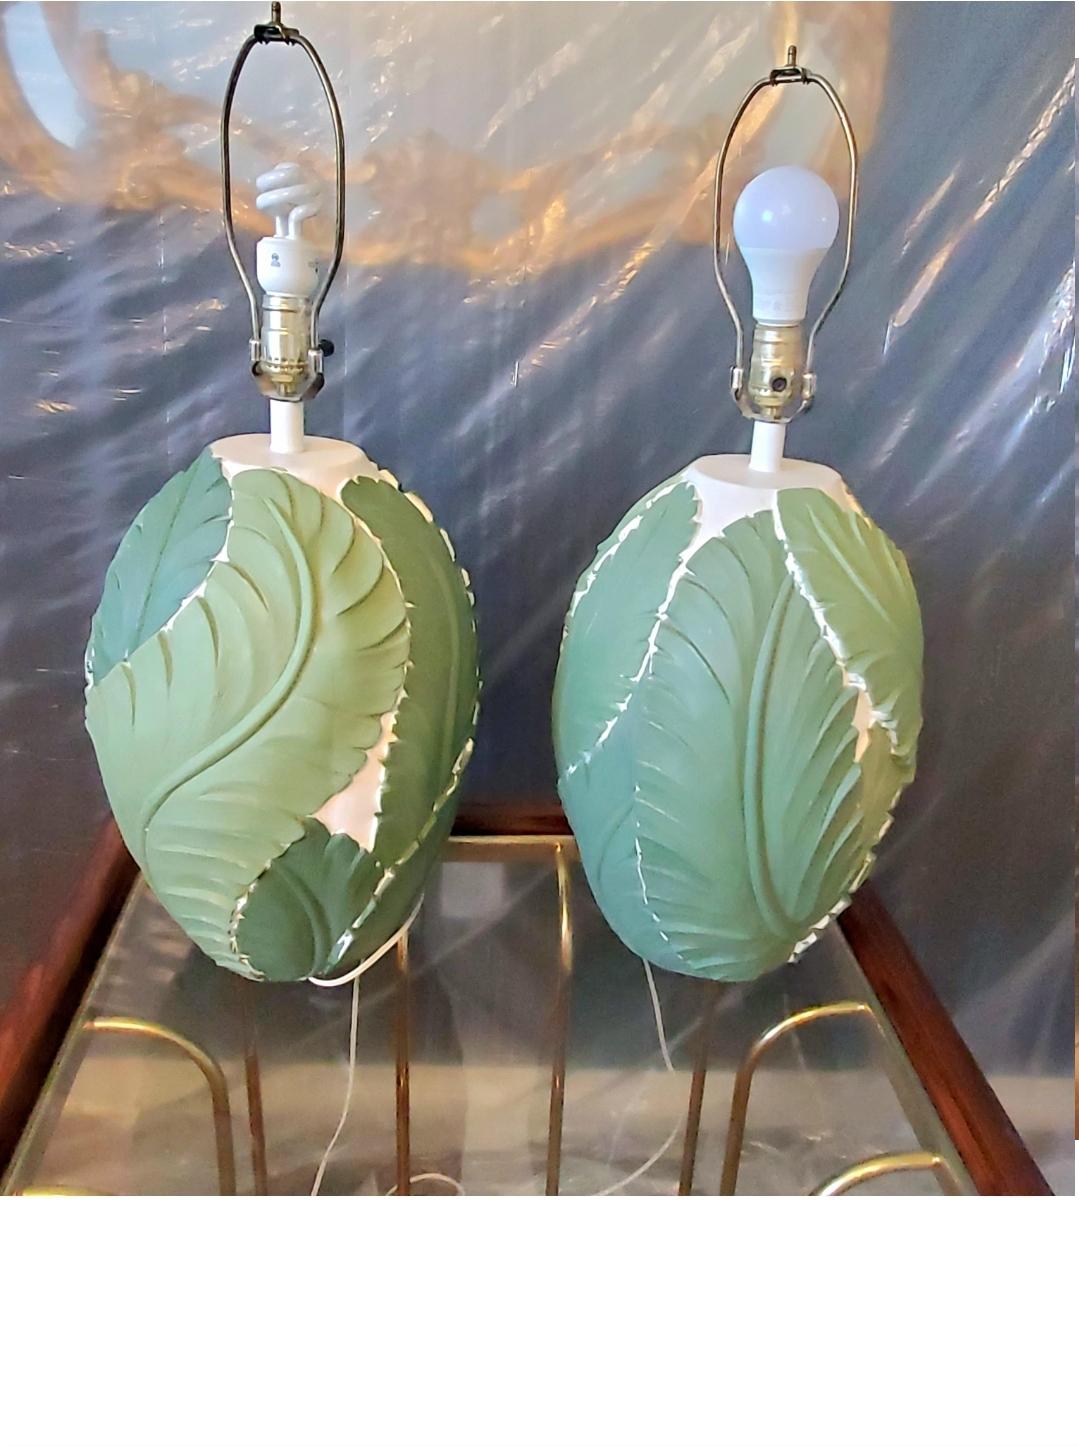 Vintage Plaster Hand Painted Banana Leaf Lamps - a Pair For Sale 3